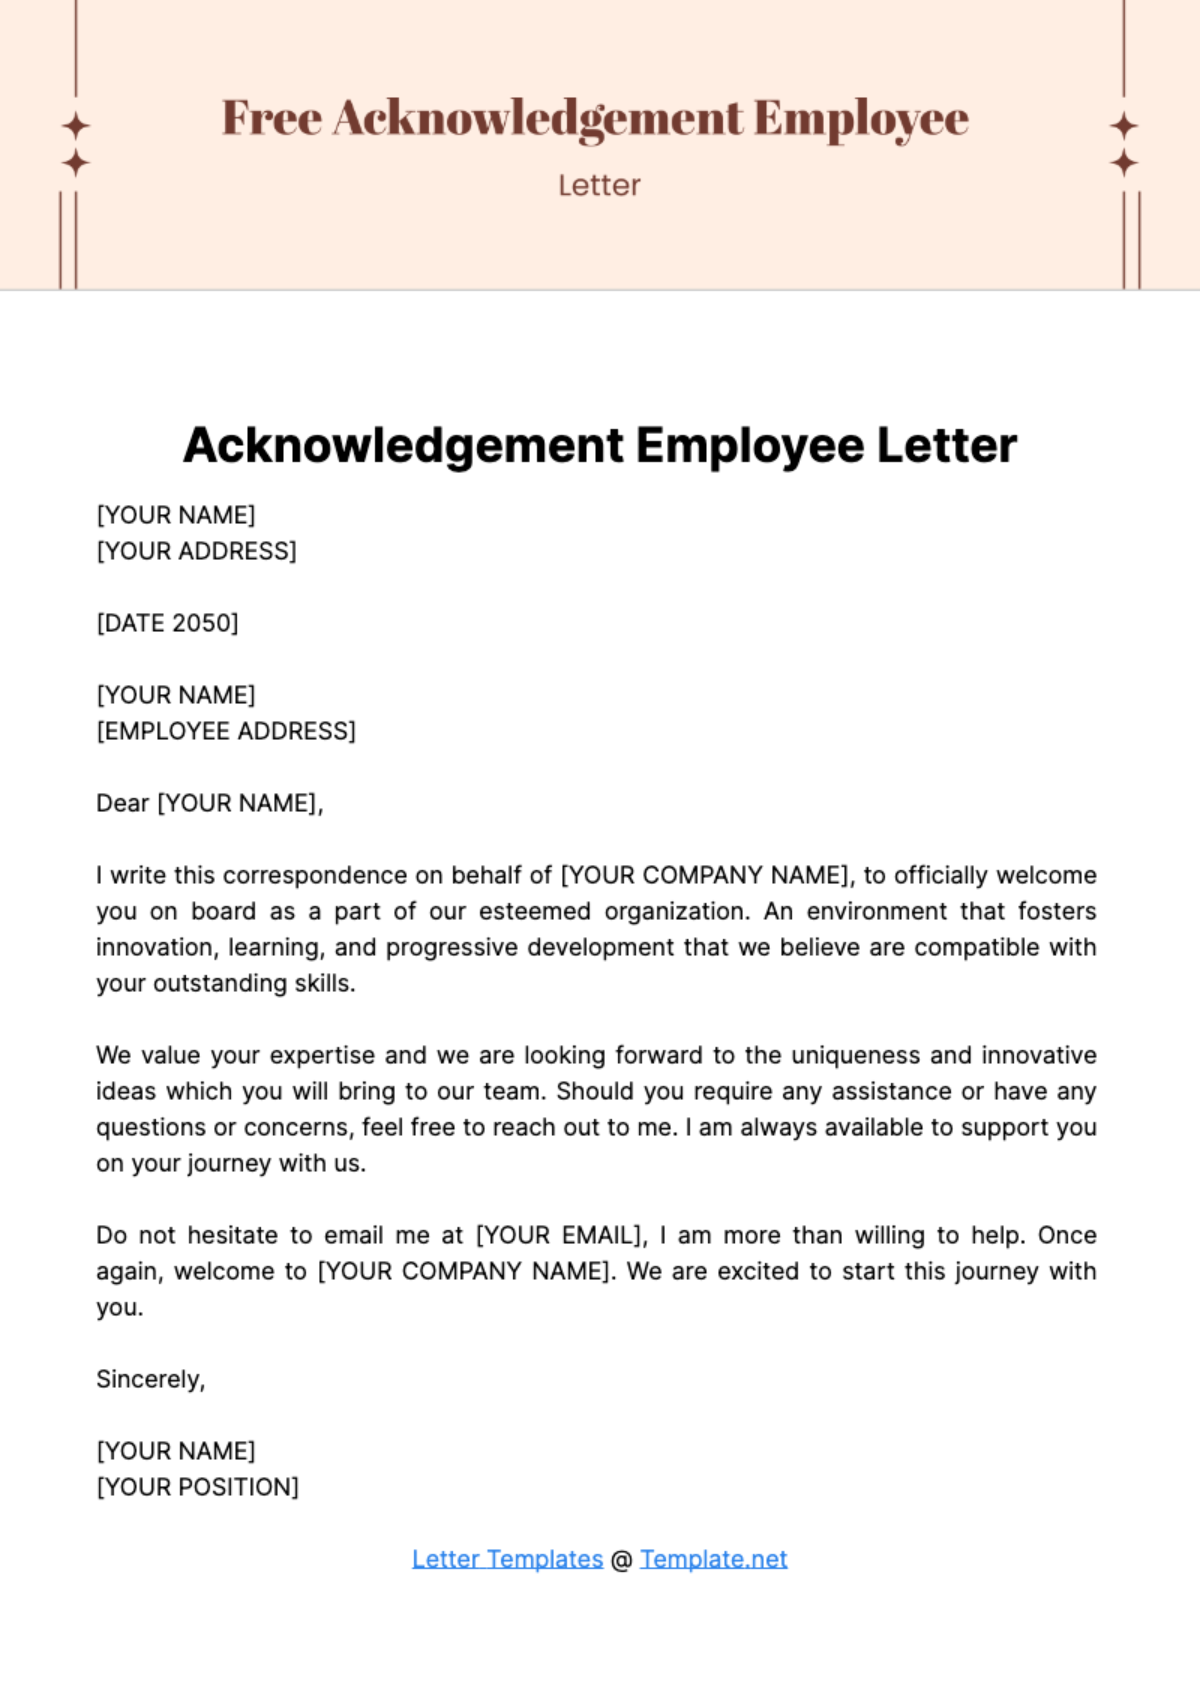 Free Acknowledgement Employee Letter Template